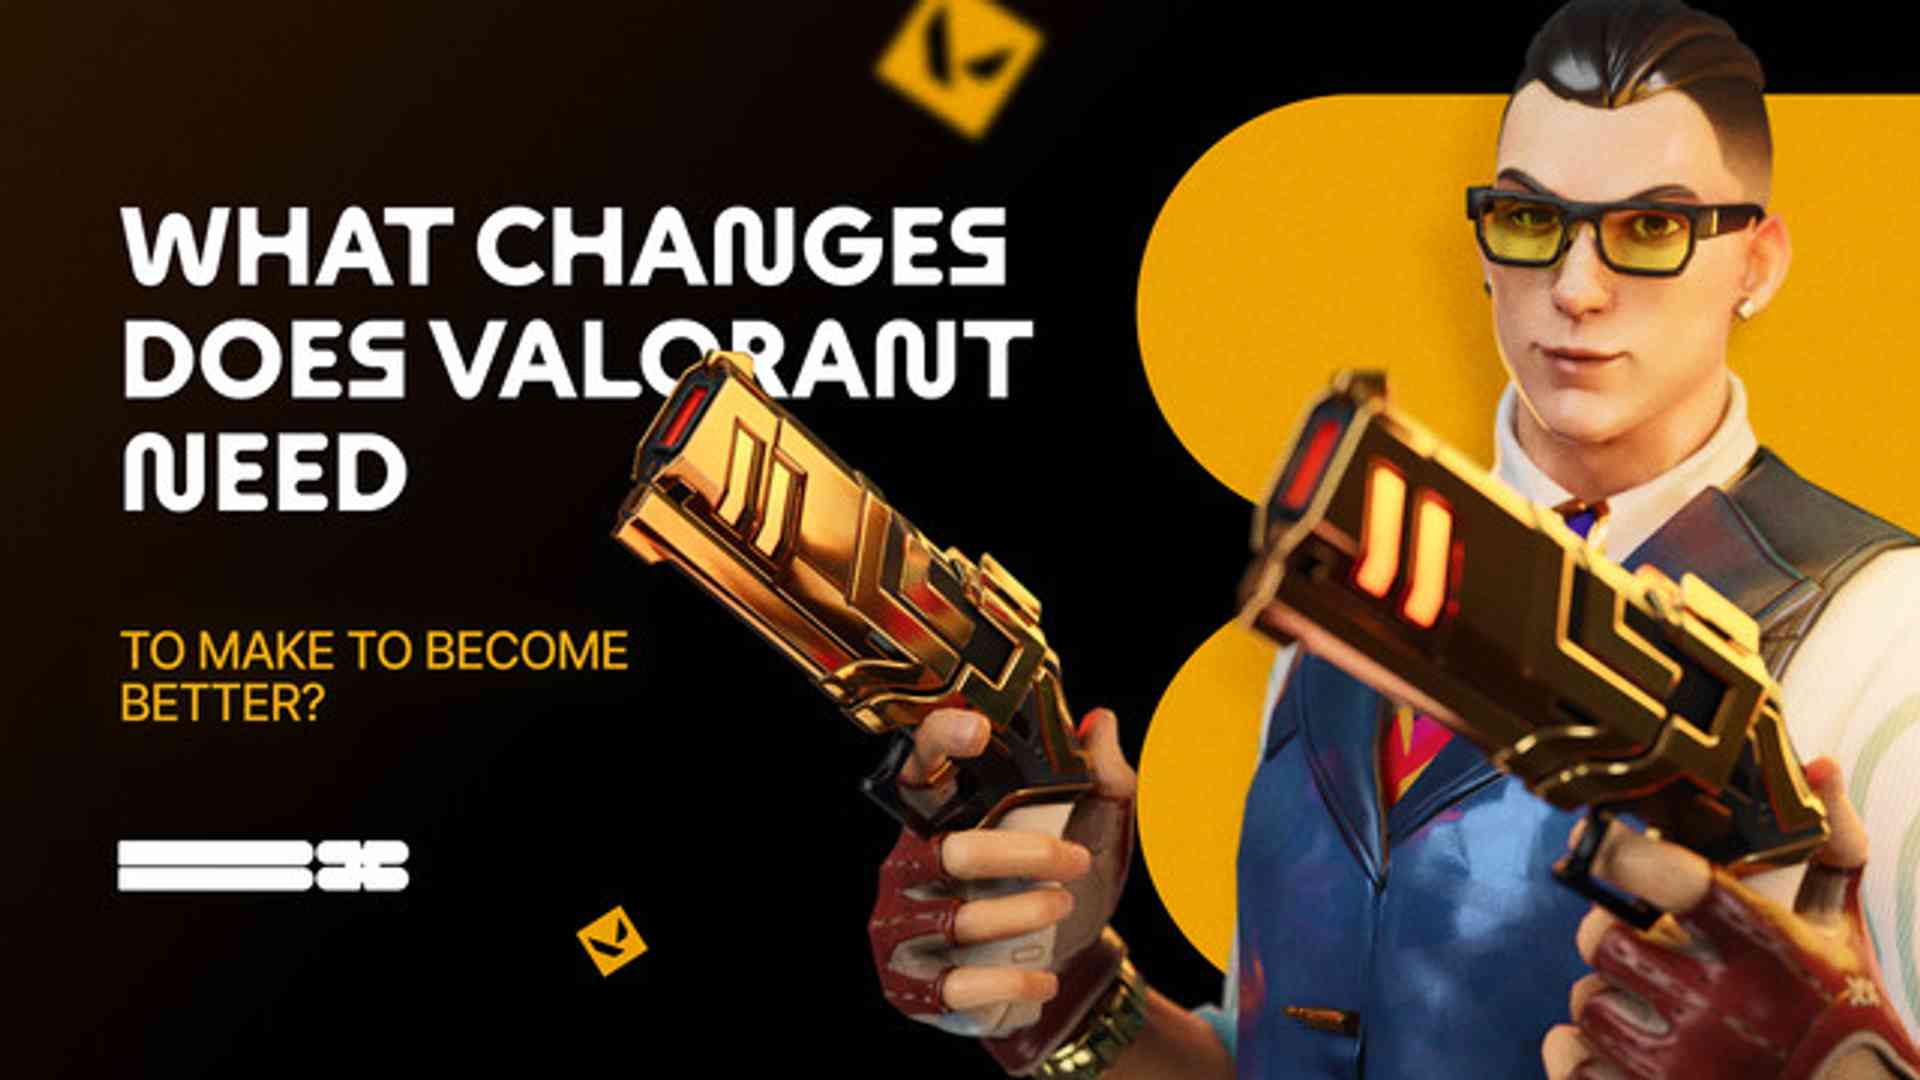 How to get a Fist Bump Gun Buddy in Valorant – Riot explains